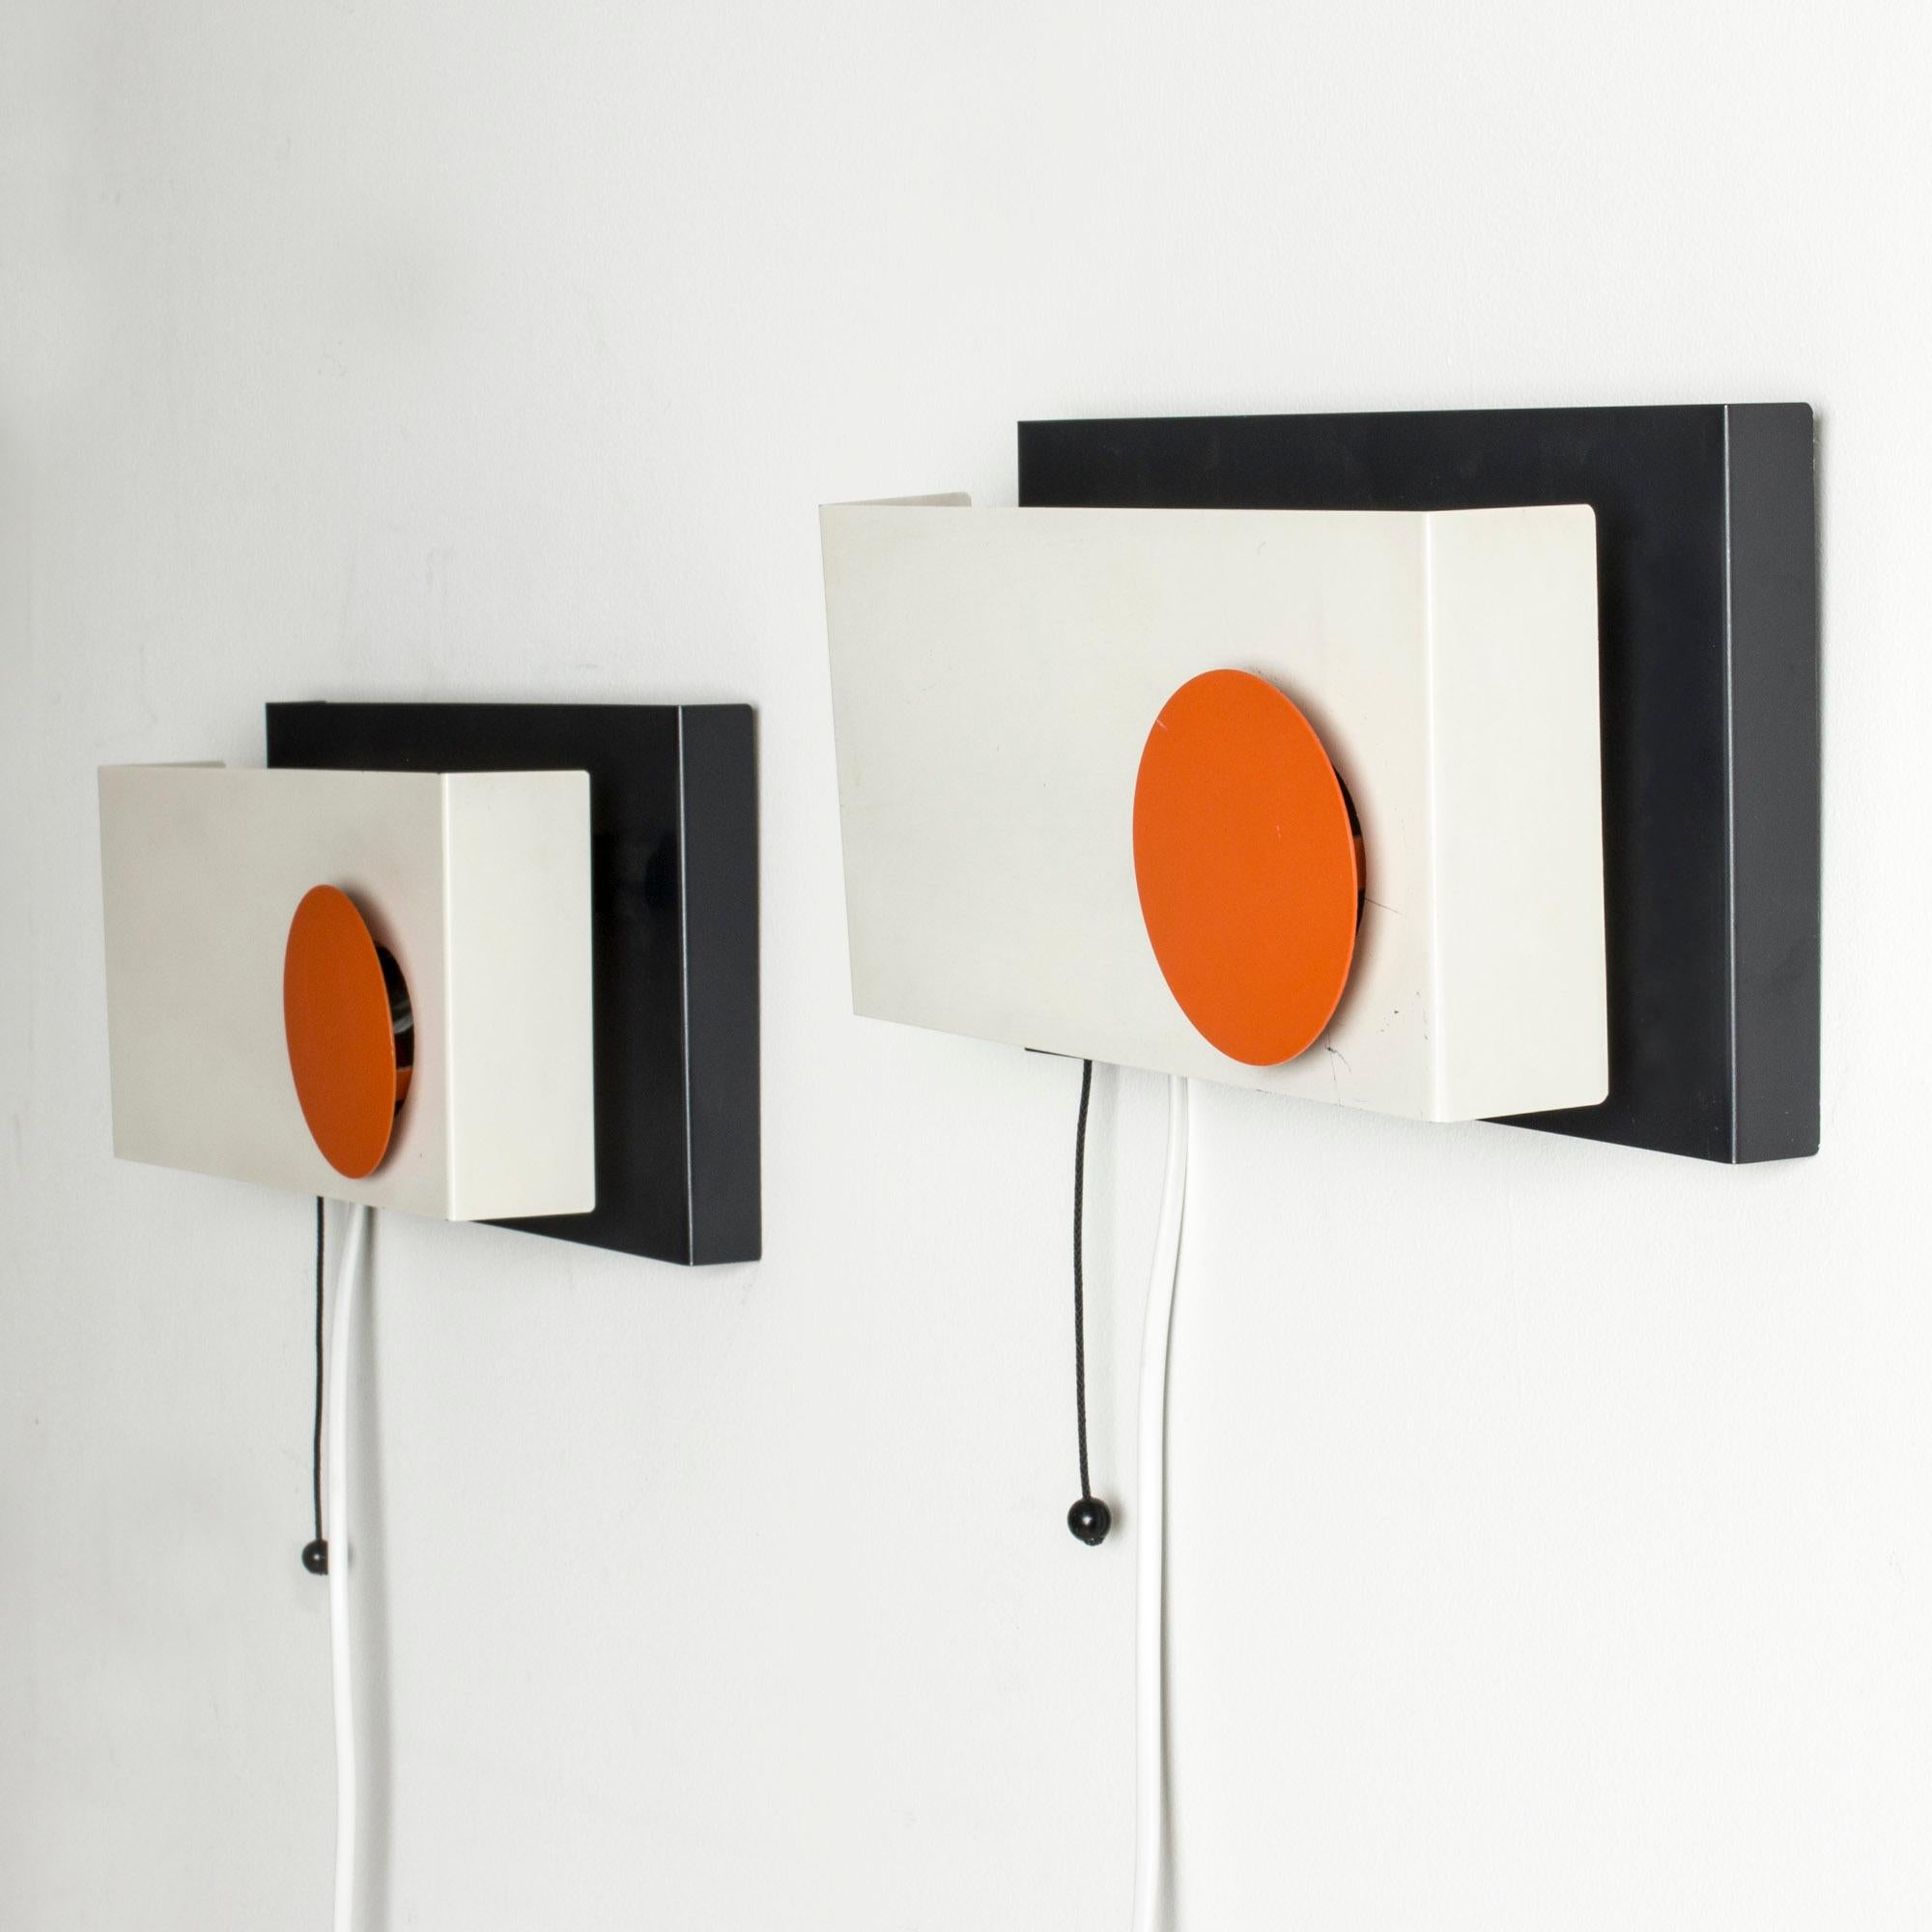 Pair of strikingly graphic wall lights by Sven Aage Holm Sørensen. Made from metal lacquered white, black and orange.